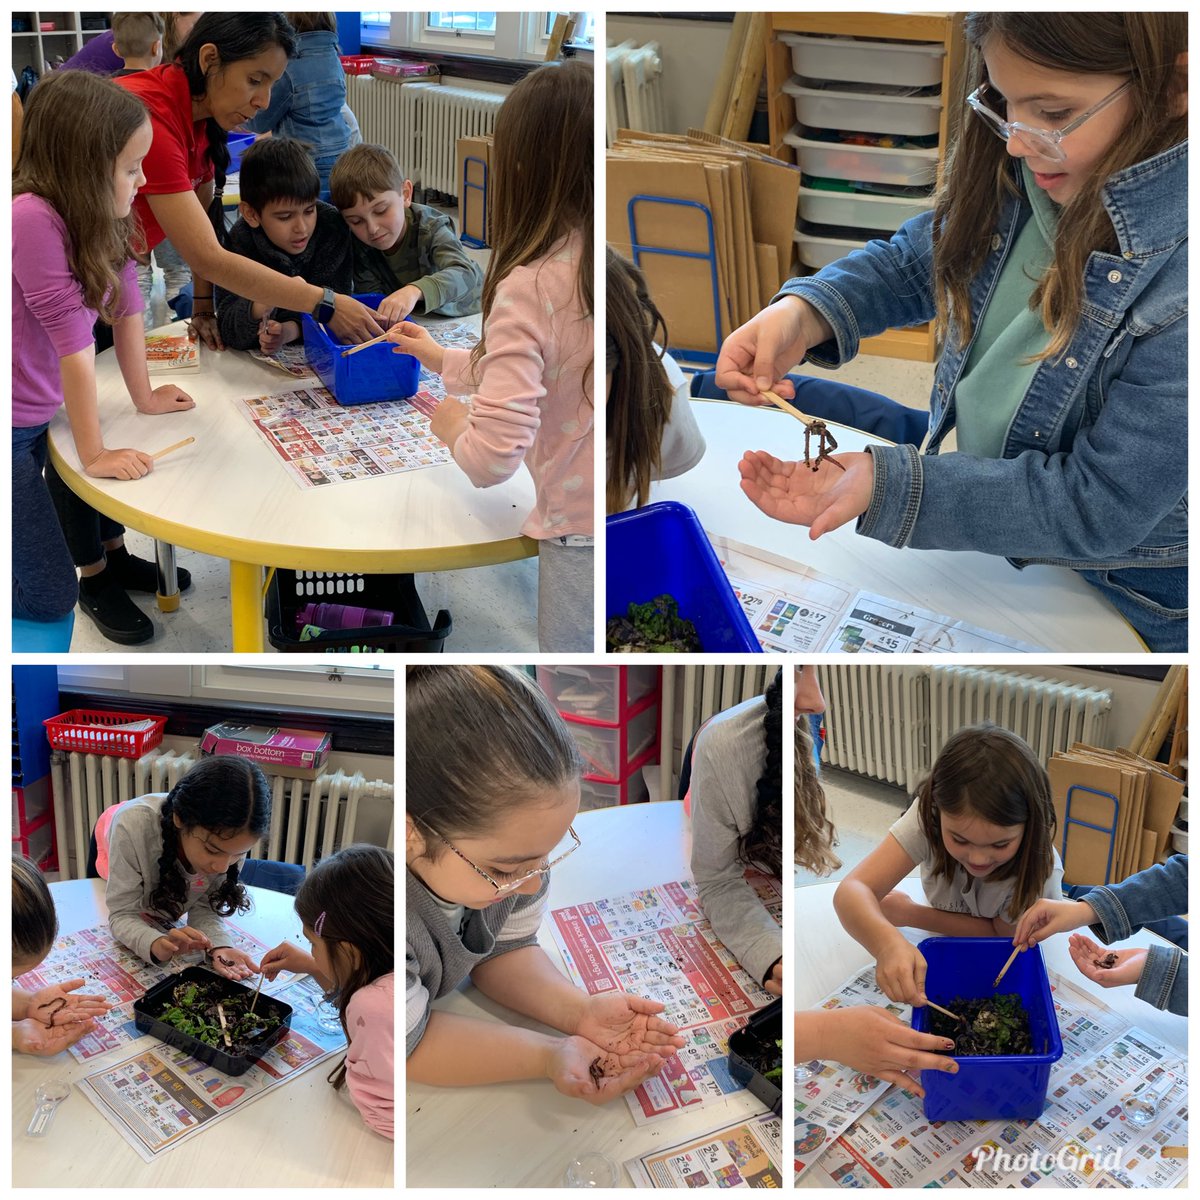 #WeeLoveComposting! Thank you to the Rutgers 4H club for coming to visit our grade 2 classrooms to teach us about composting today. Great hands-on STEM activity! ⁦@WeehawkenTSD⁩ ⁦@bcalligy⁩ ⁦@EricCrespoEDU⁩ ⁦@FAmato53⁩ ⁦@al_orecchio⁩